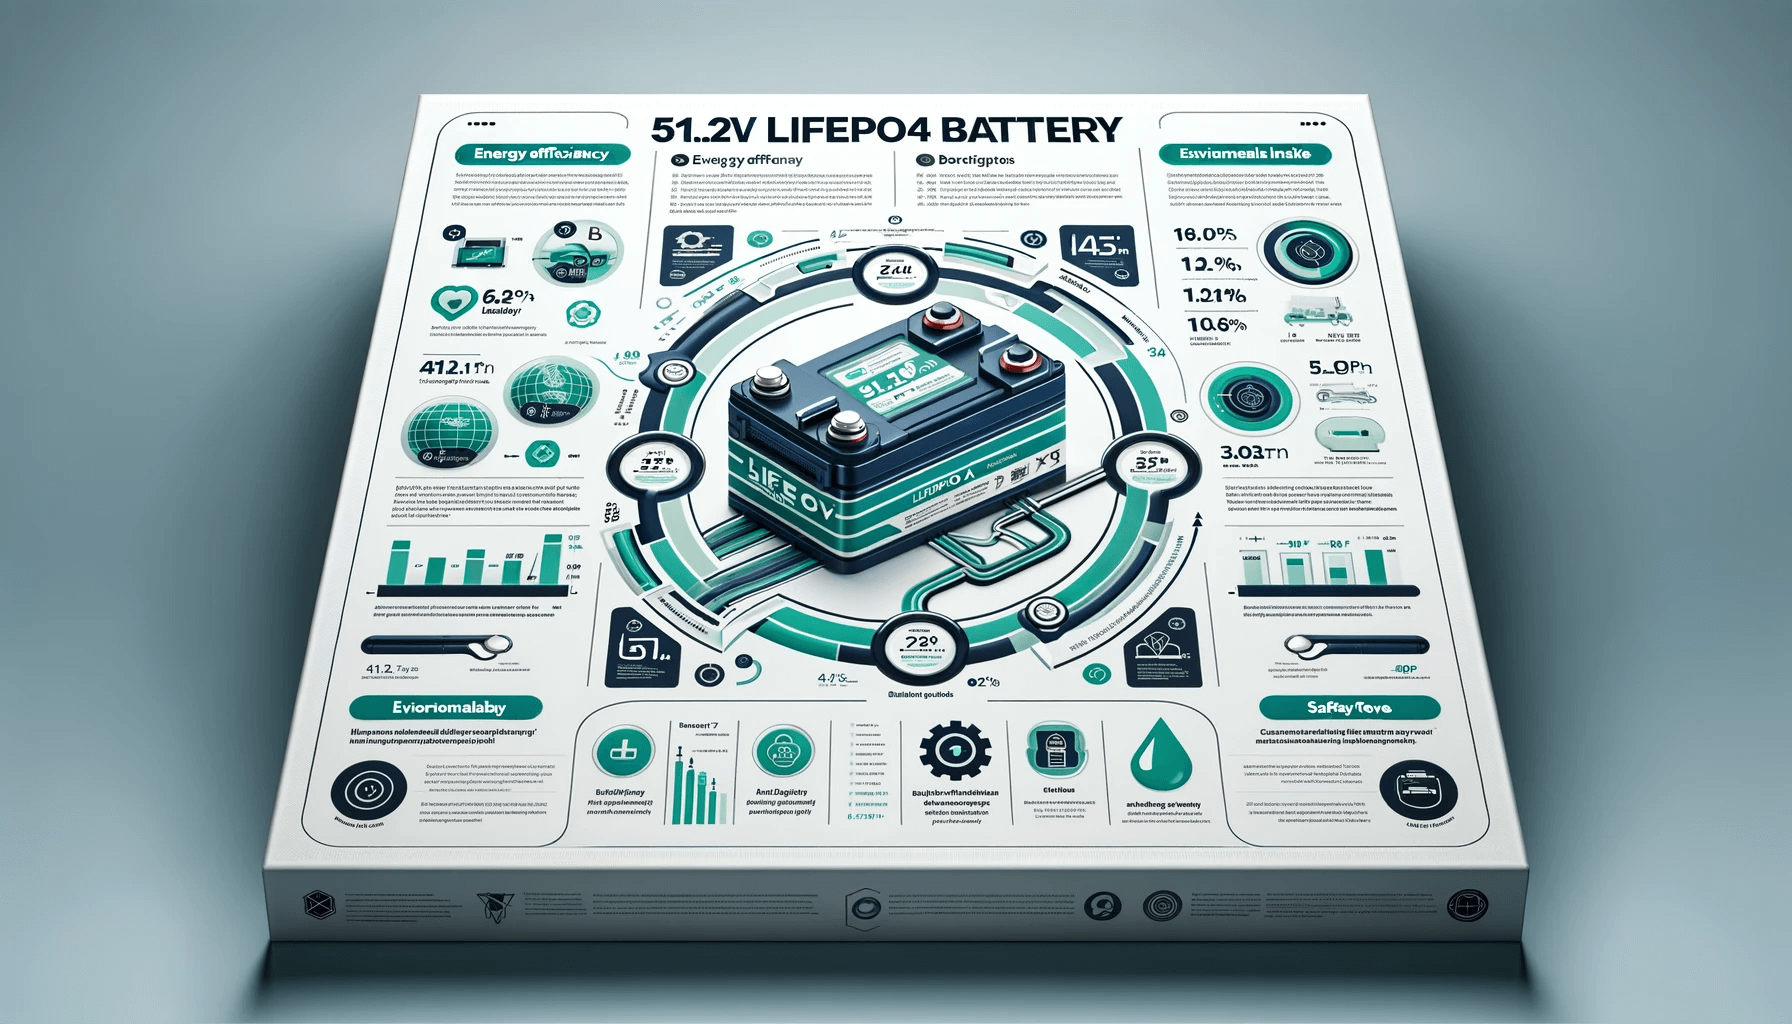 An informative infographic highlighting the advantages and technical specifications of a 51.2V LiFePO4 battery